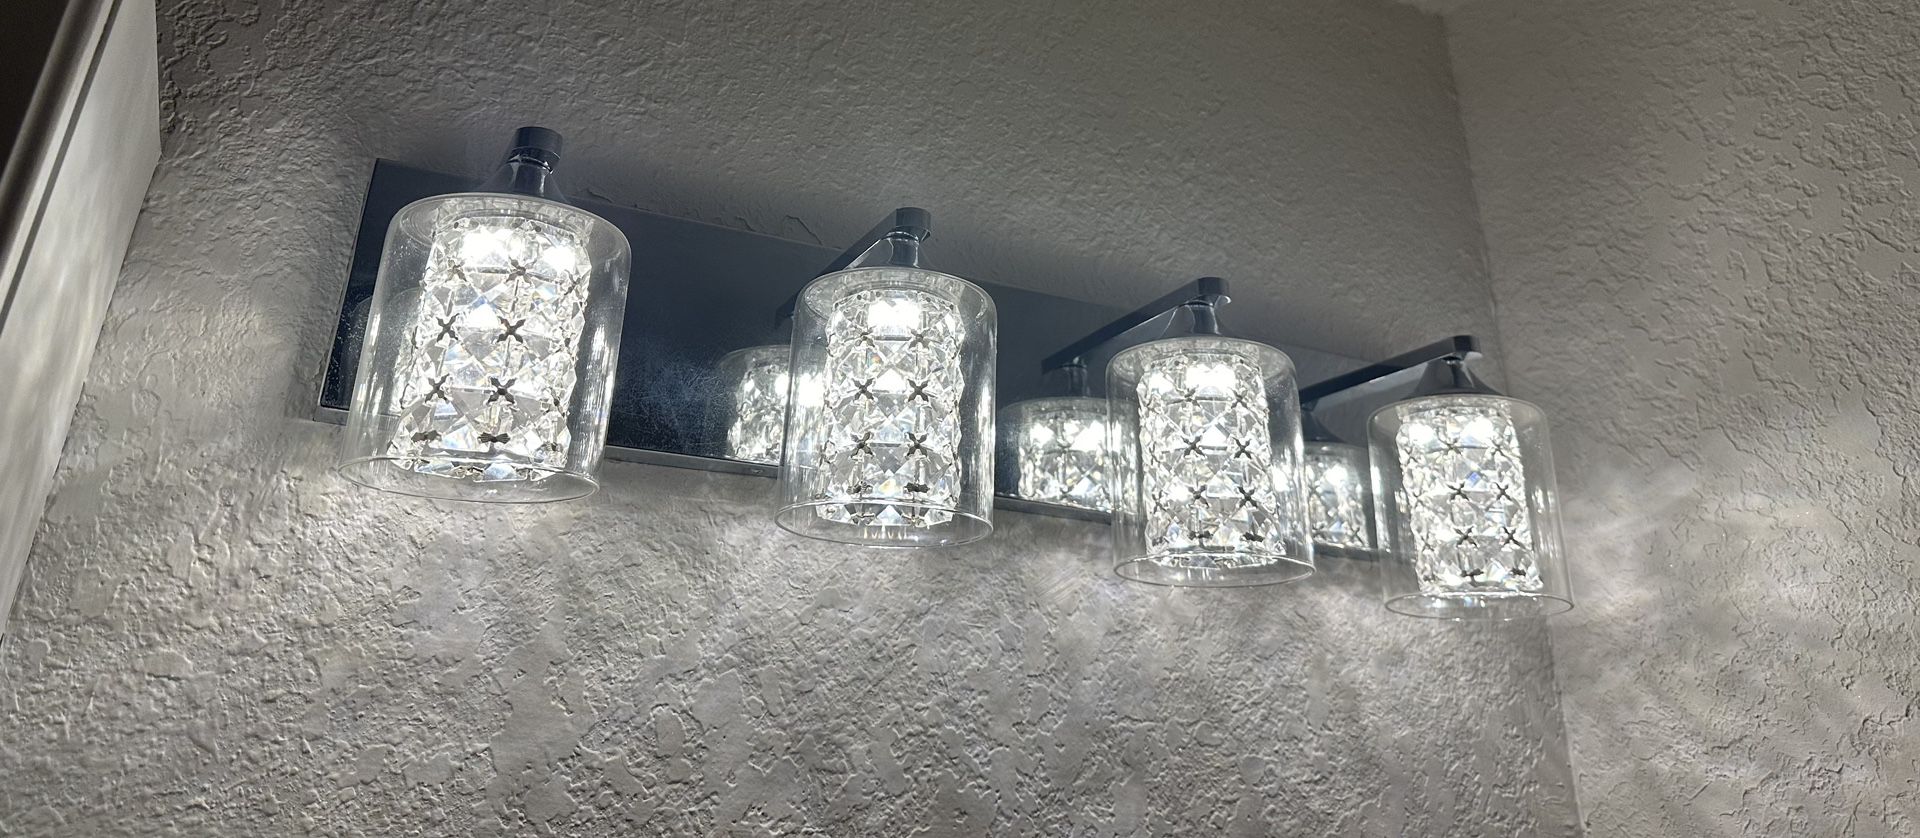 Wall Light Fixture With Crystals